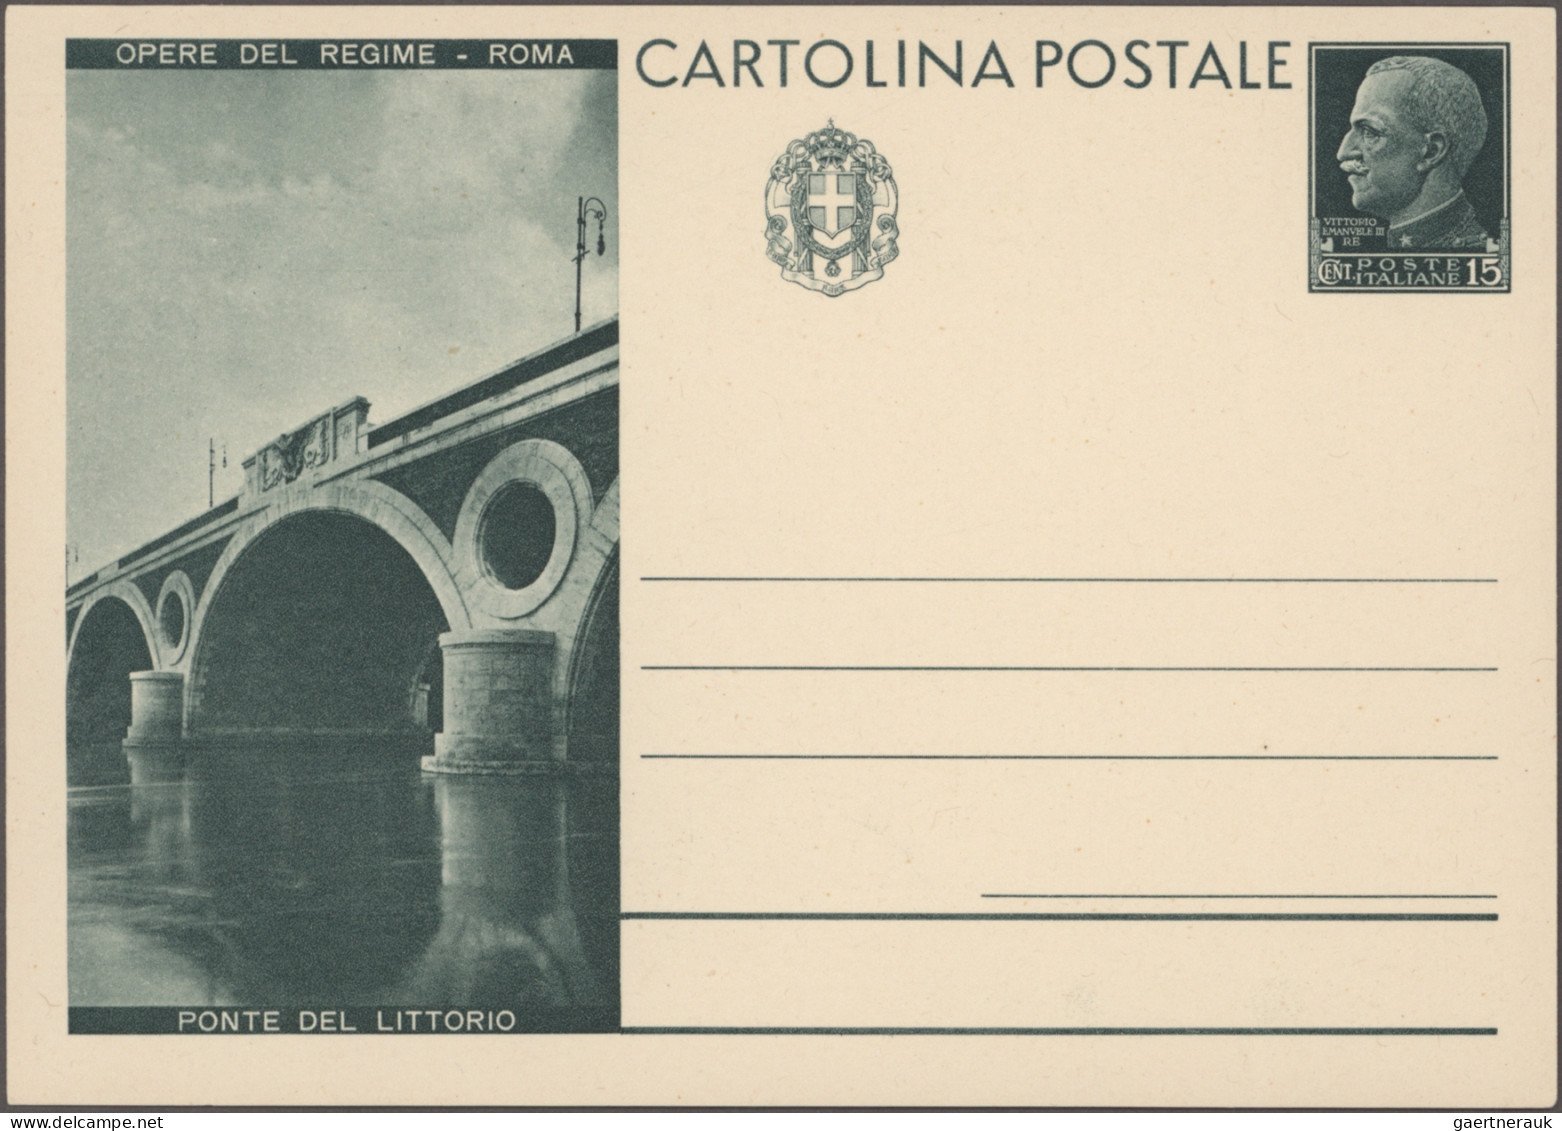 Italy - Postal Stationary: 1895/1937, Postal stationery picture cards: Specializ